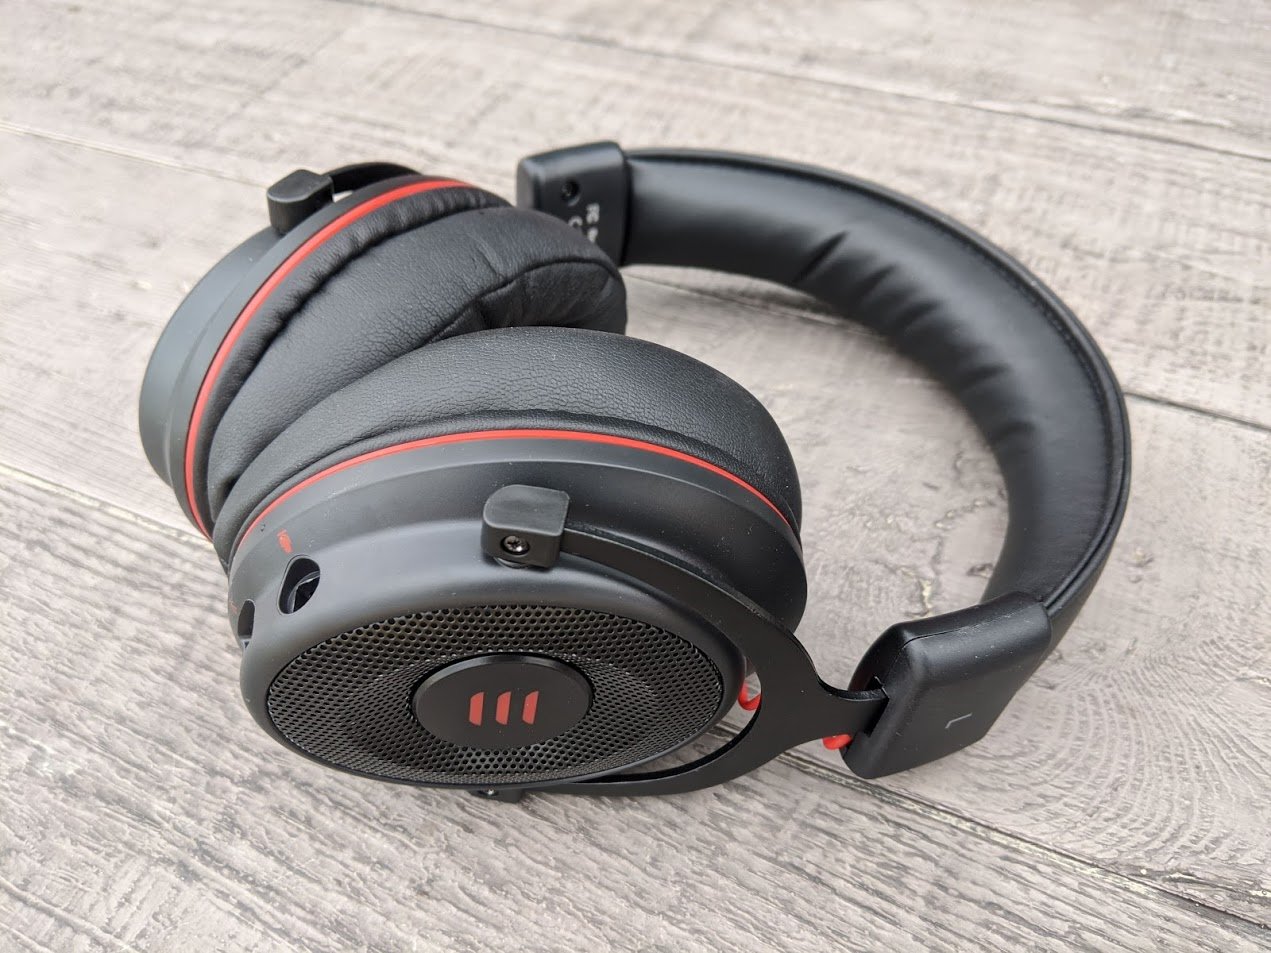 EKSA E900 Pro Gaming Headset review Great experience for you, but